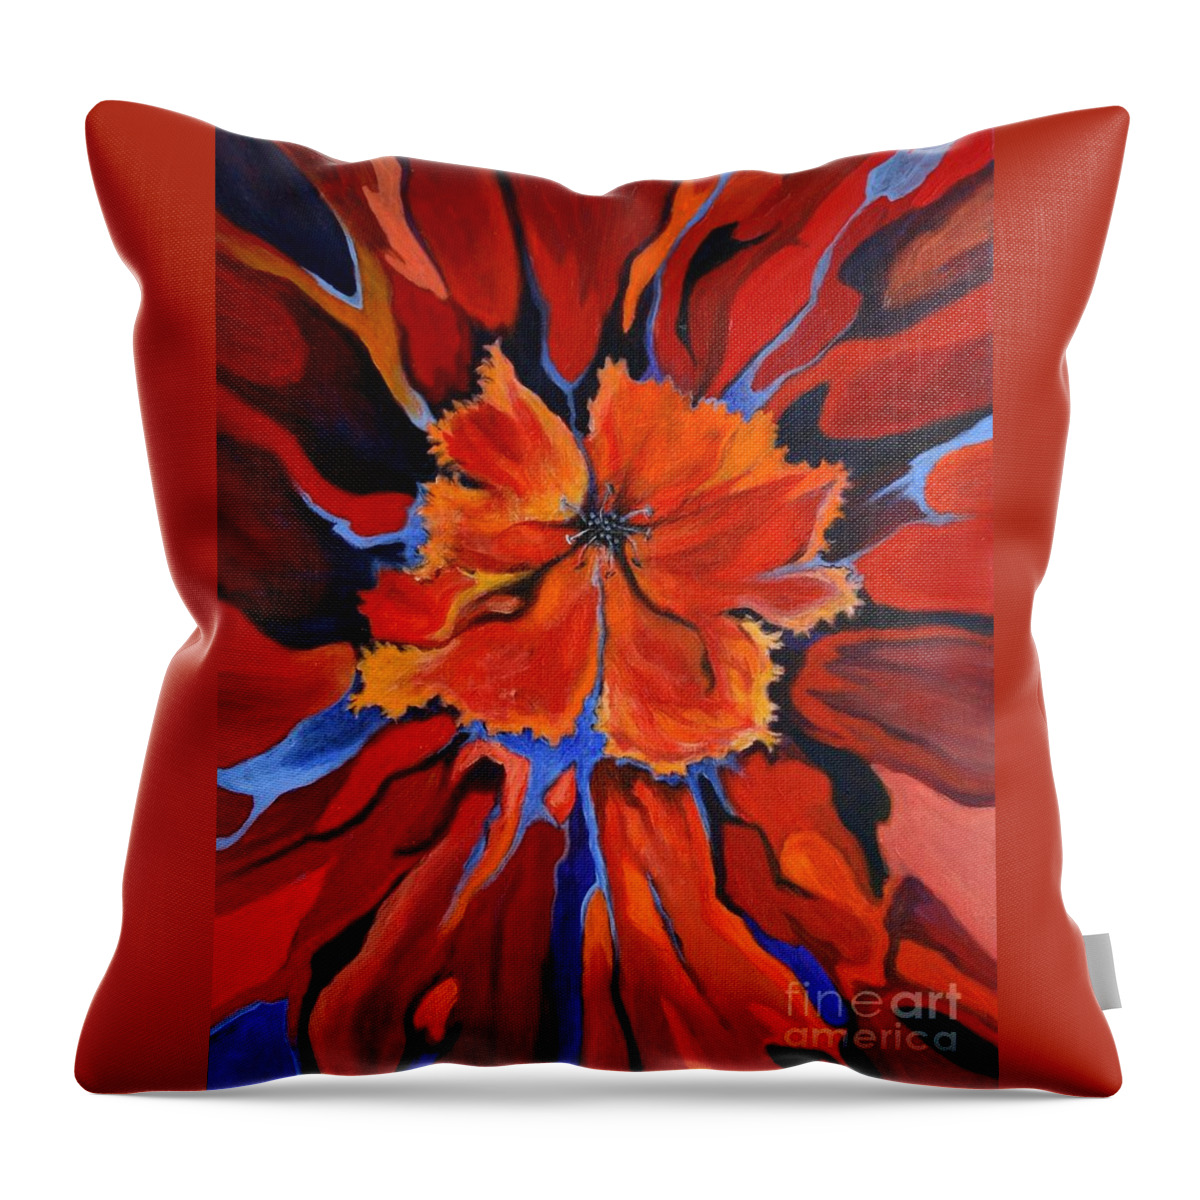 Flower Throw Pillow featuring the painting Red Bloom by Alison Caltrider